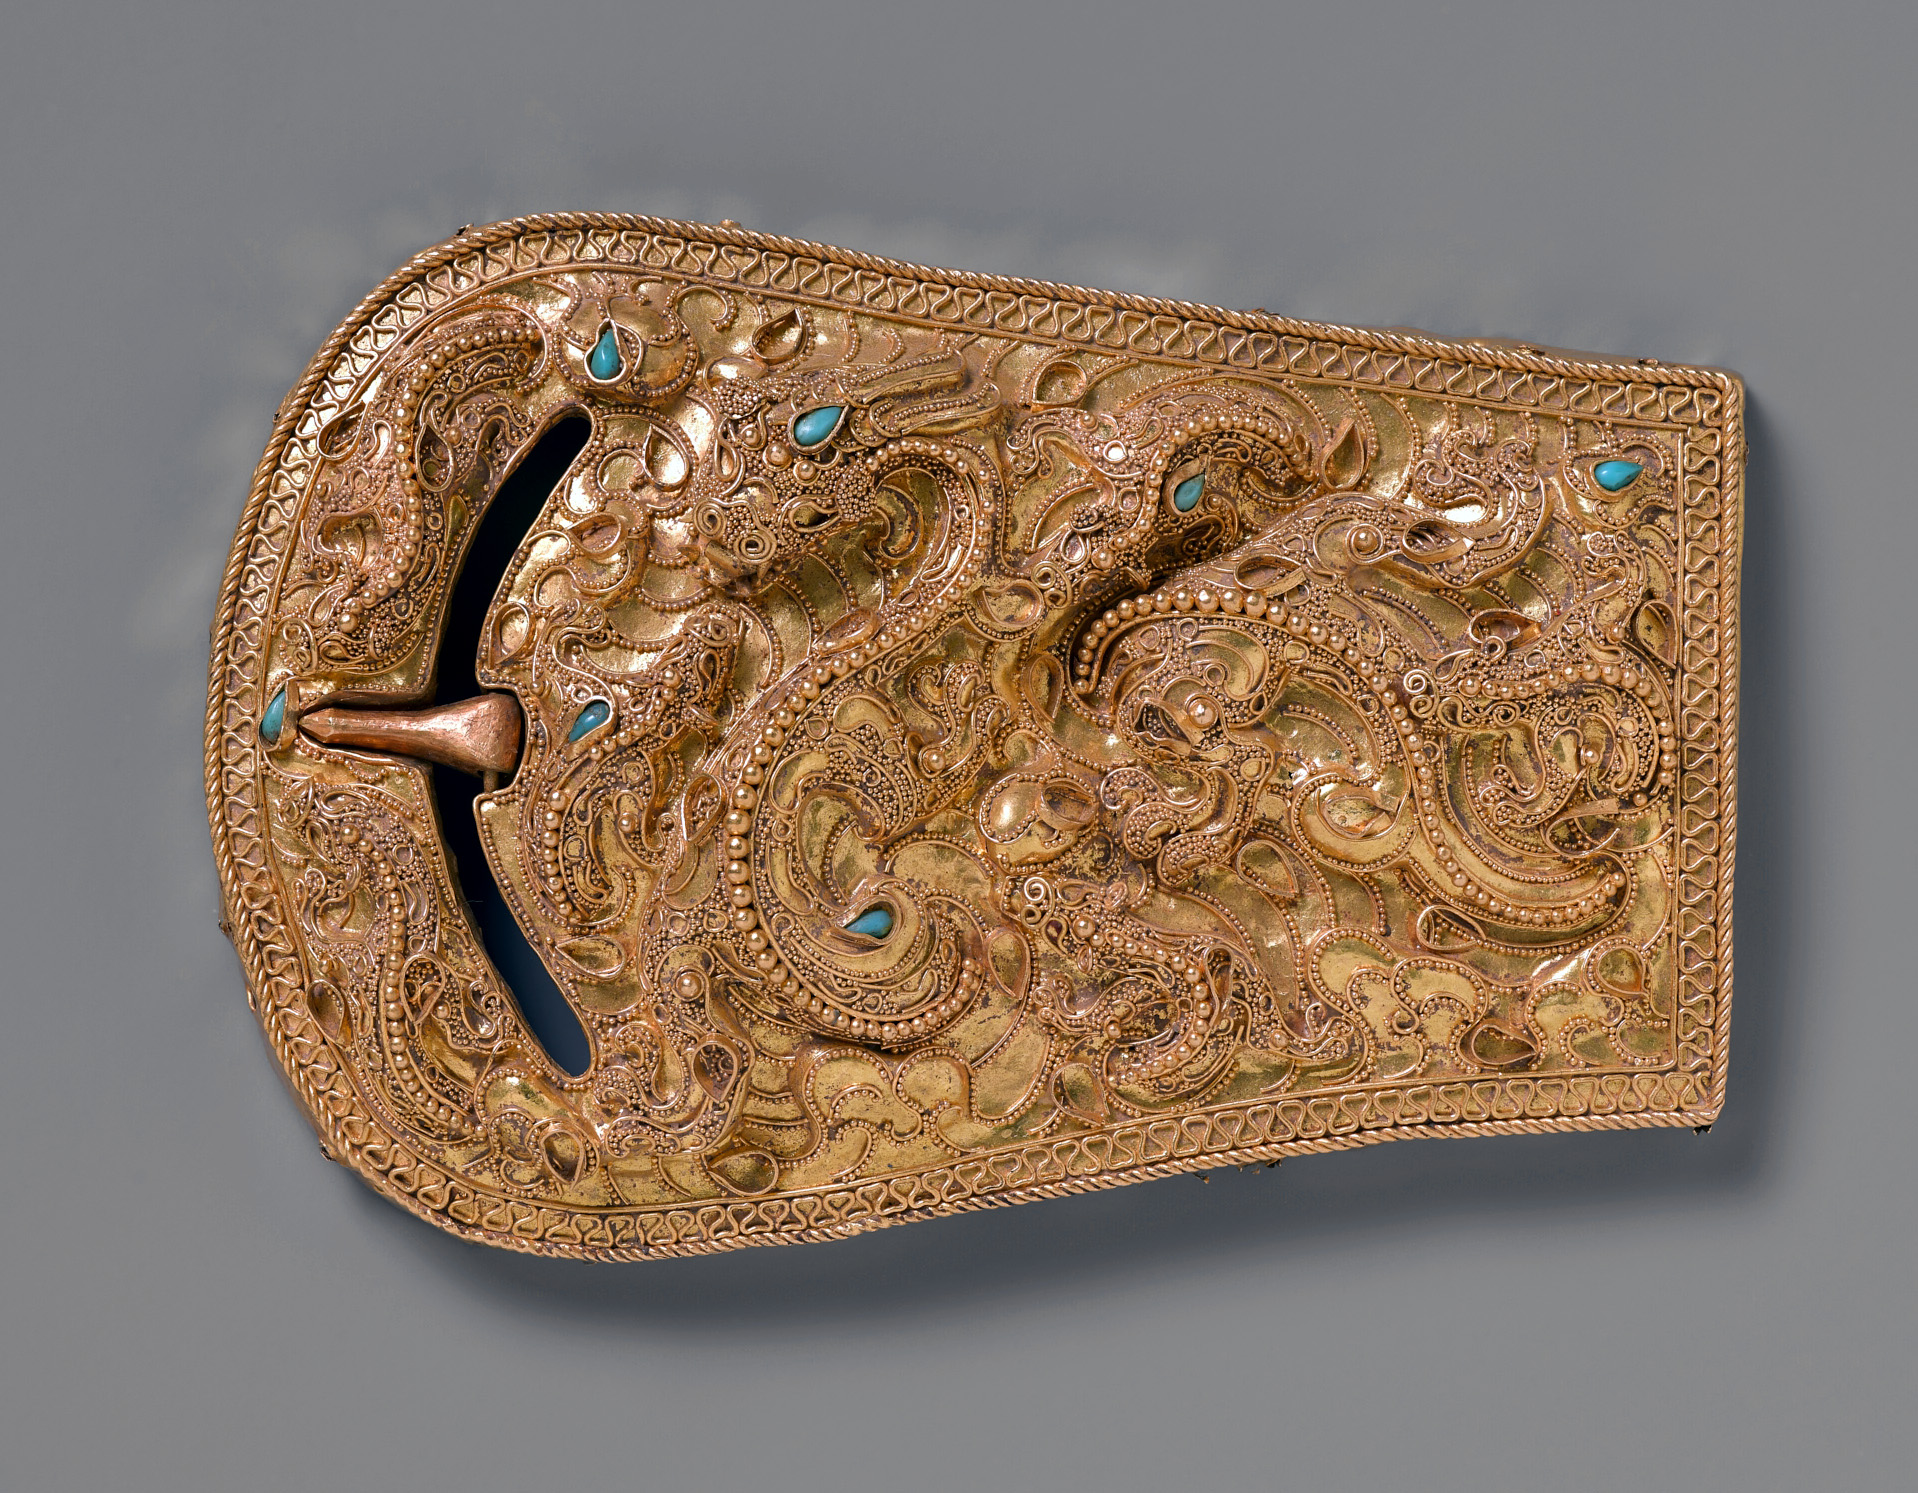 and gold buckle